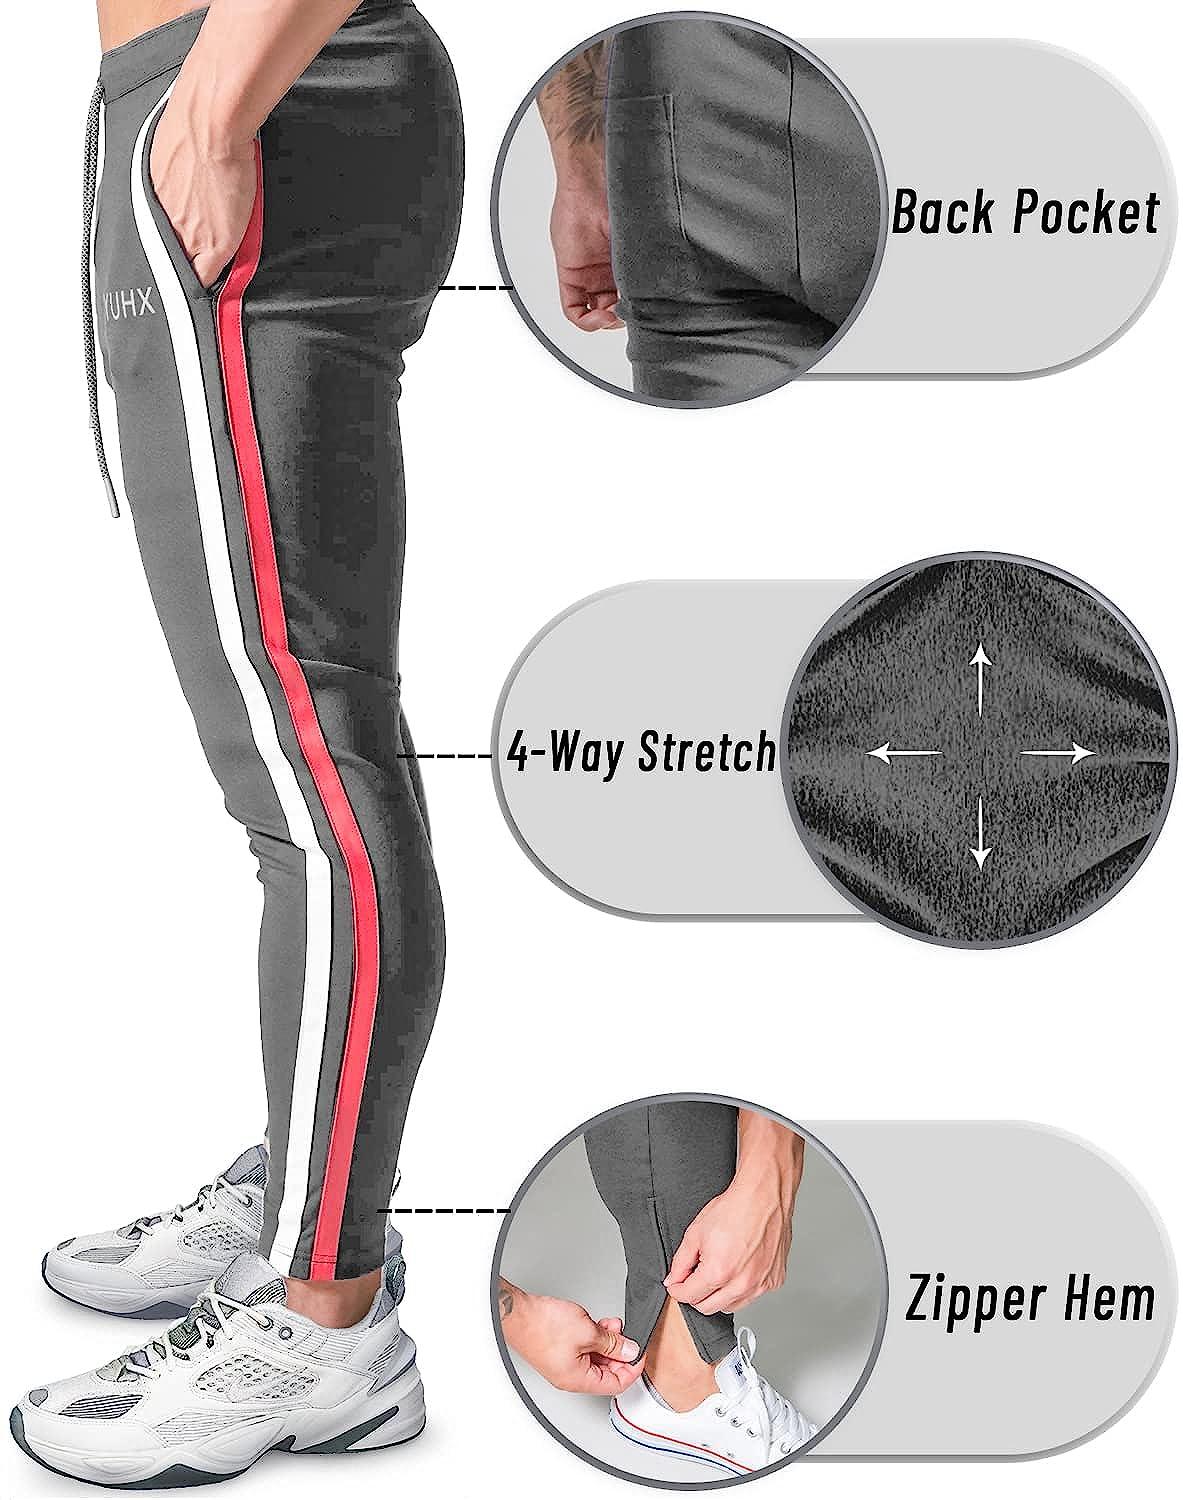 Men Sports Tights with Pockets Elastic Waist Drawstring Tapered